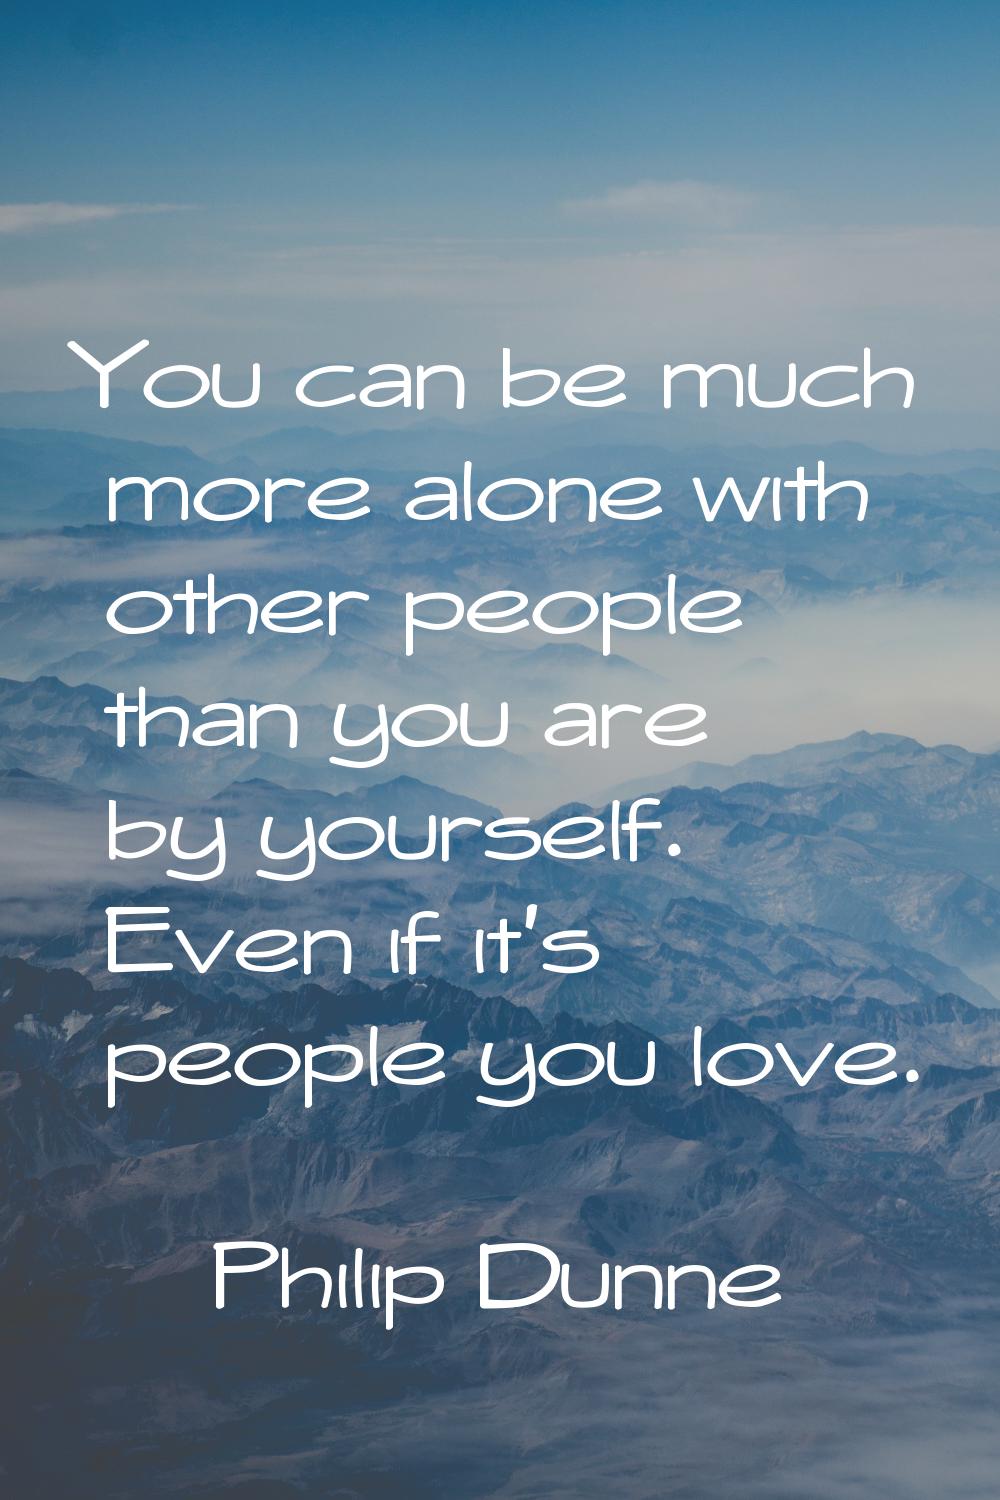 You can be much more alone with other people than you are by yourself. Even if it's people you love